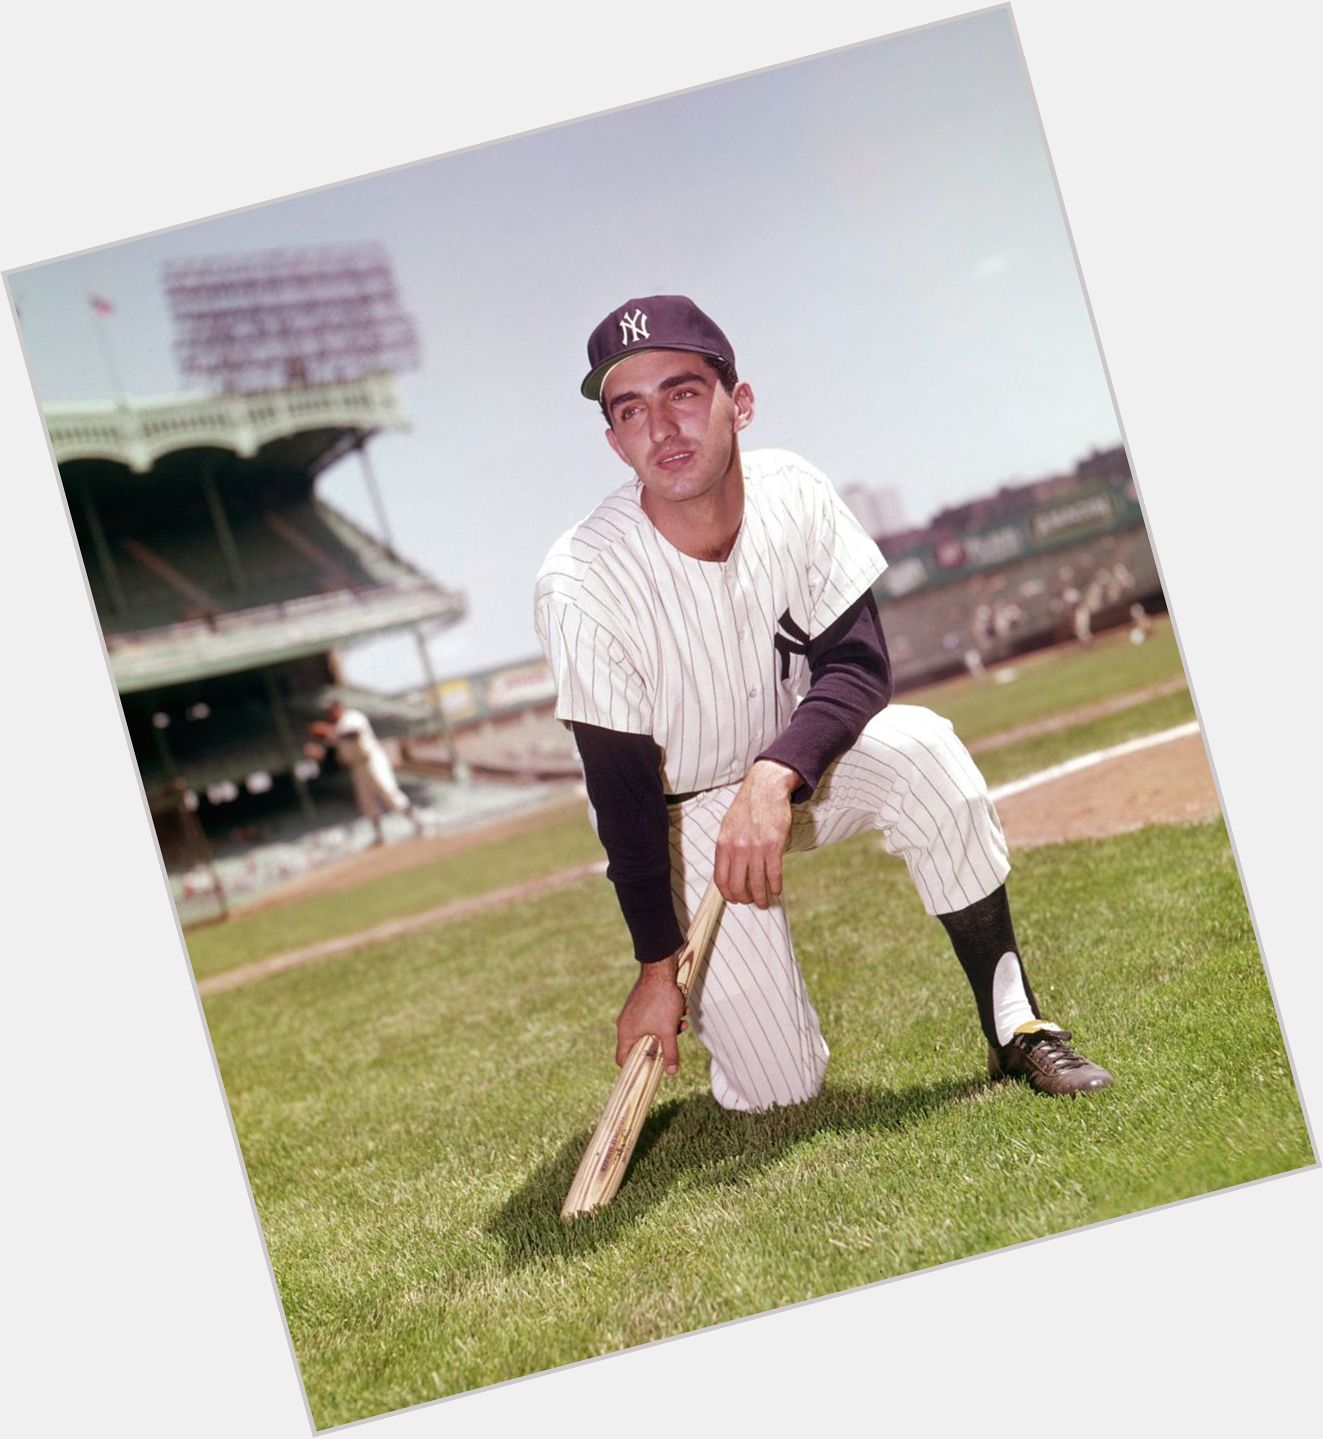 Happy 77th bday today to former Yankee, Cub and Astros \"flake\" Joe Pepitone, a pretty hitter and fielder! 